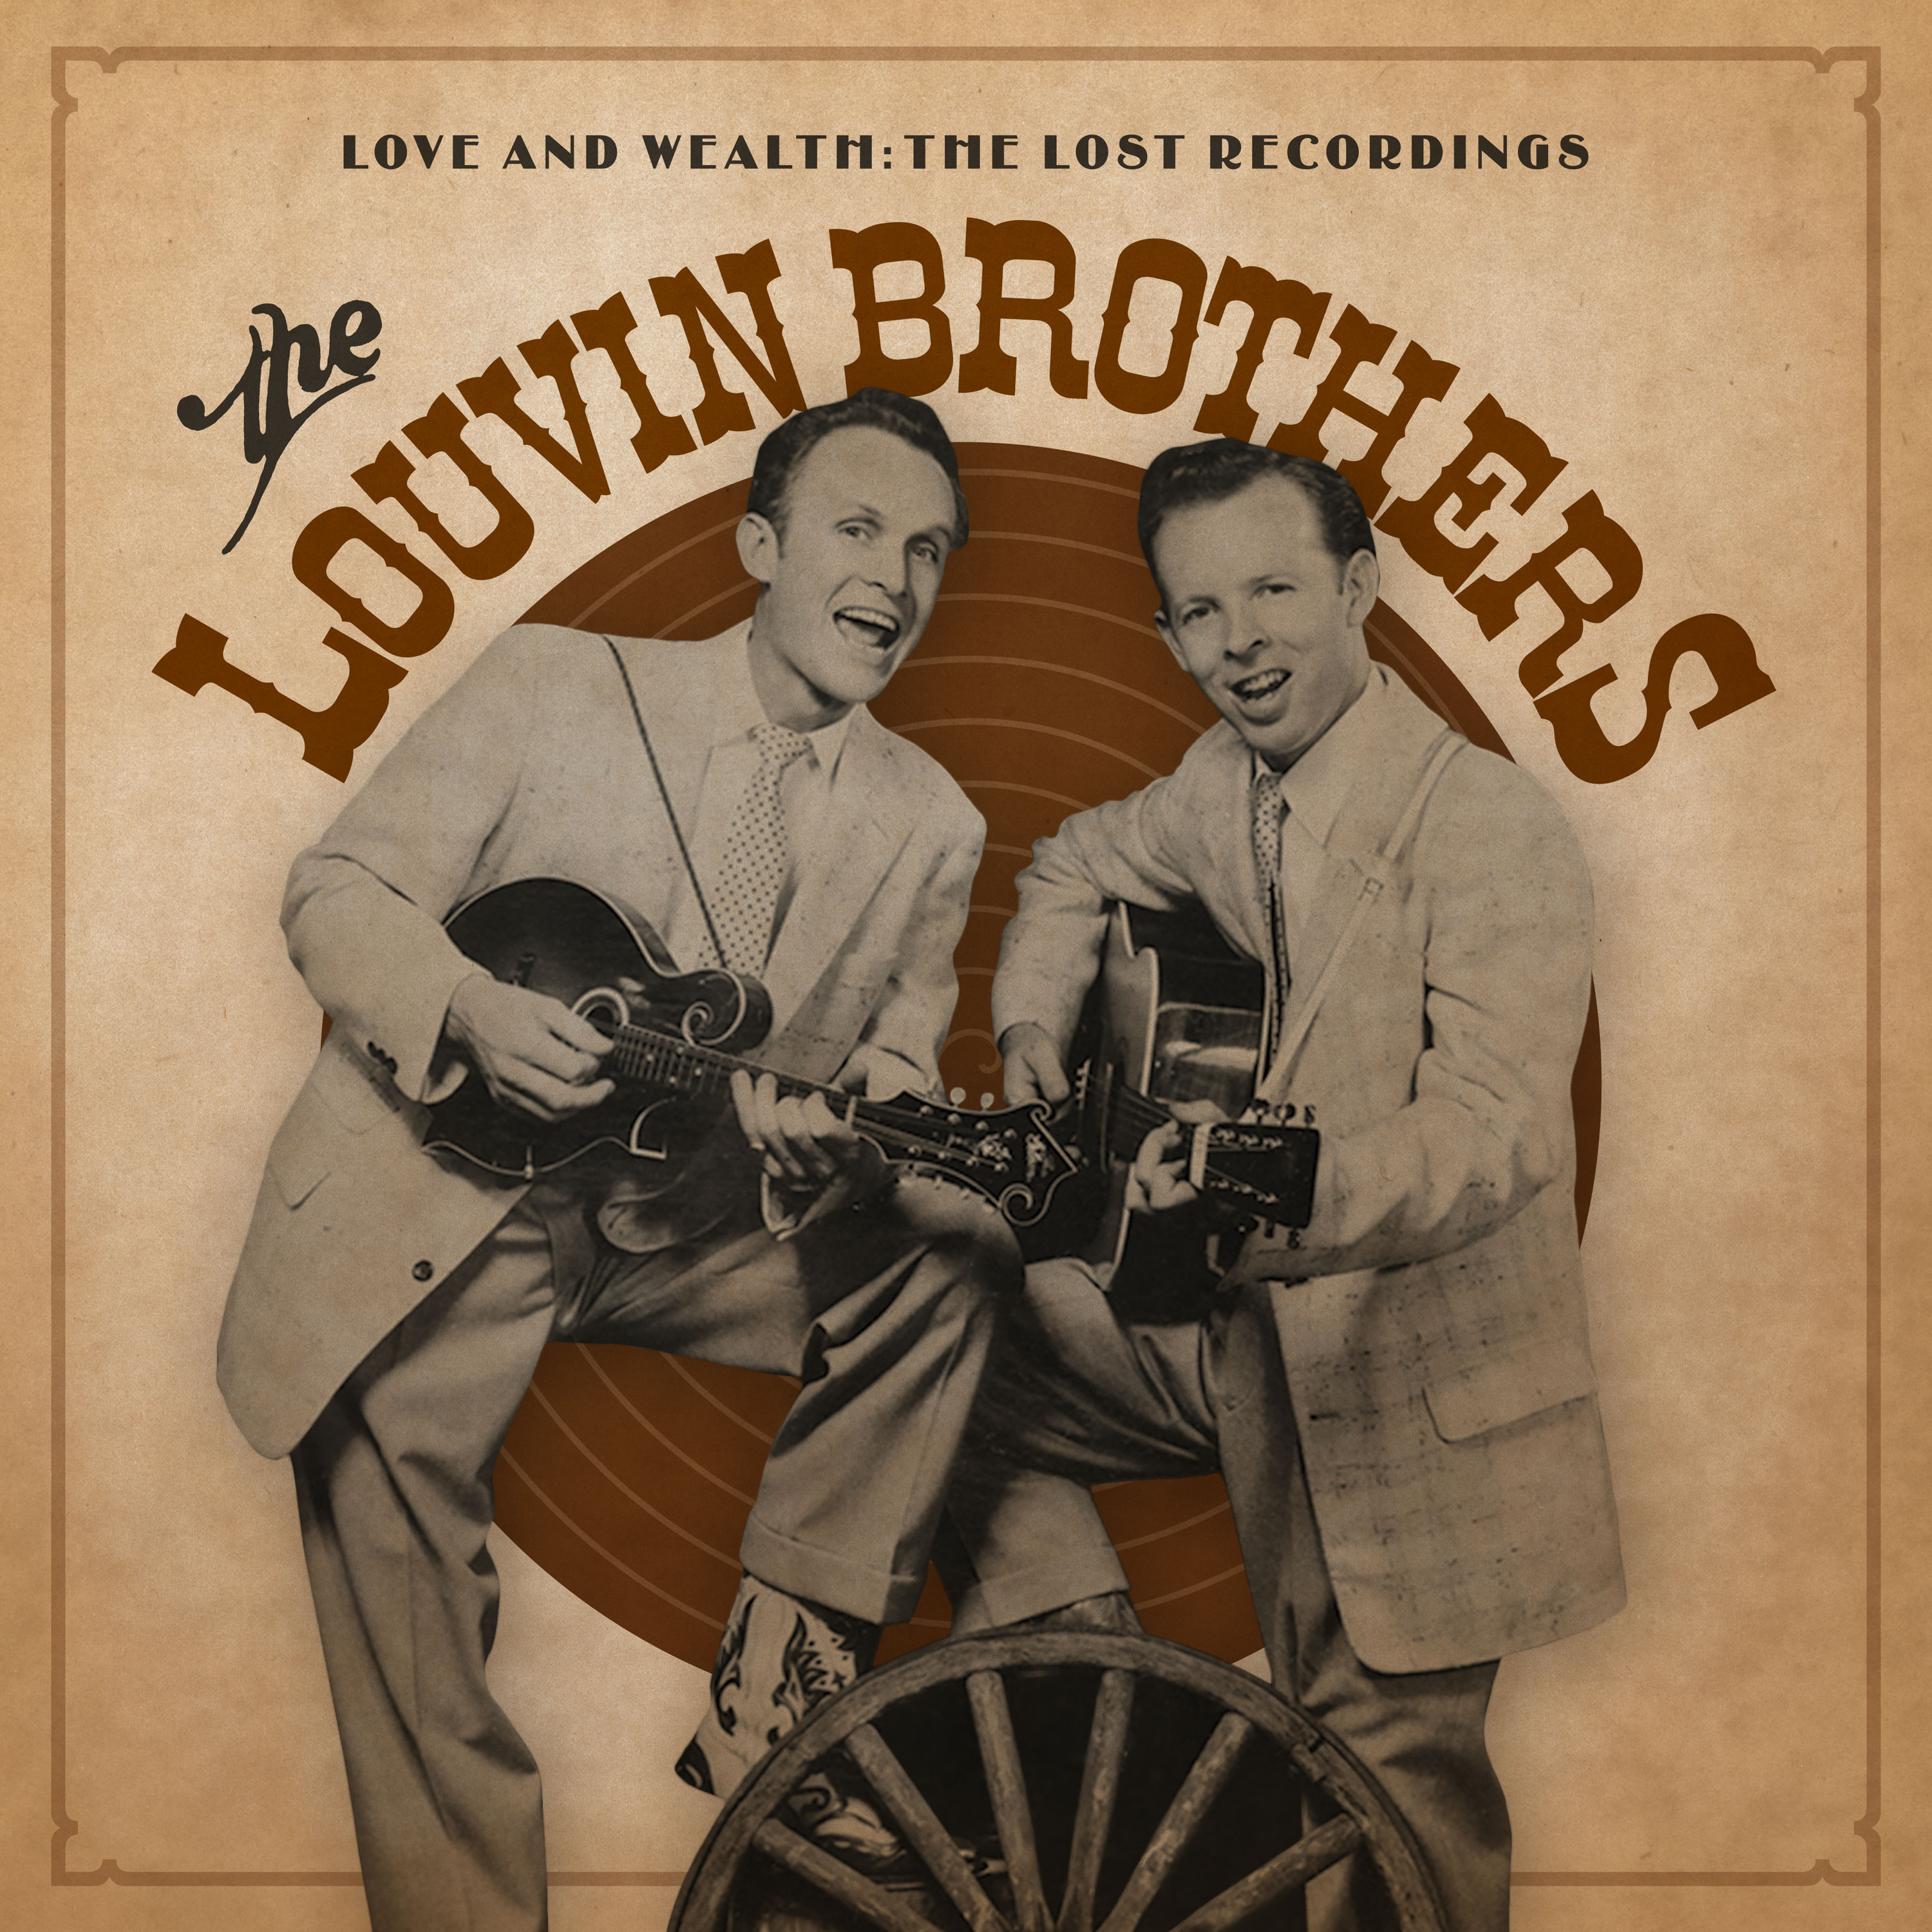 Louvin Brothers, The - Love And Wealth: The Lost Recordings - 2-LP